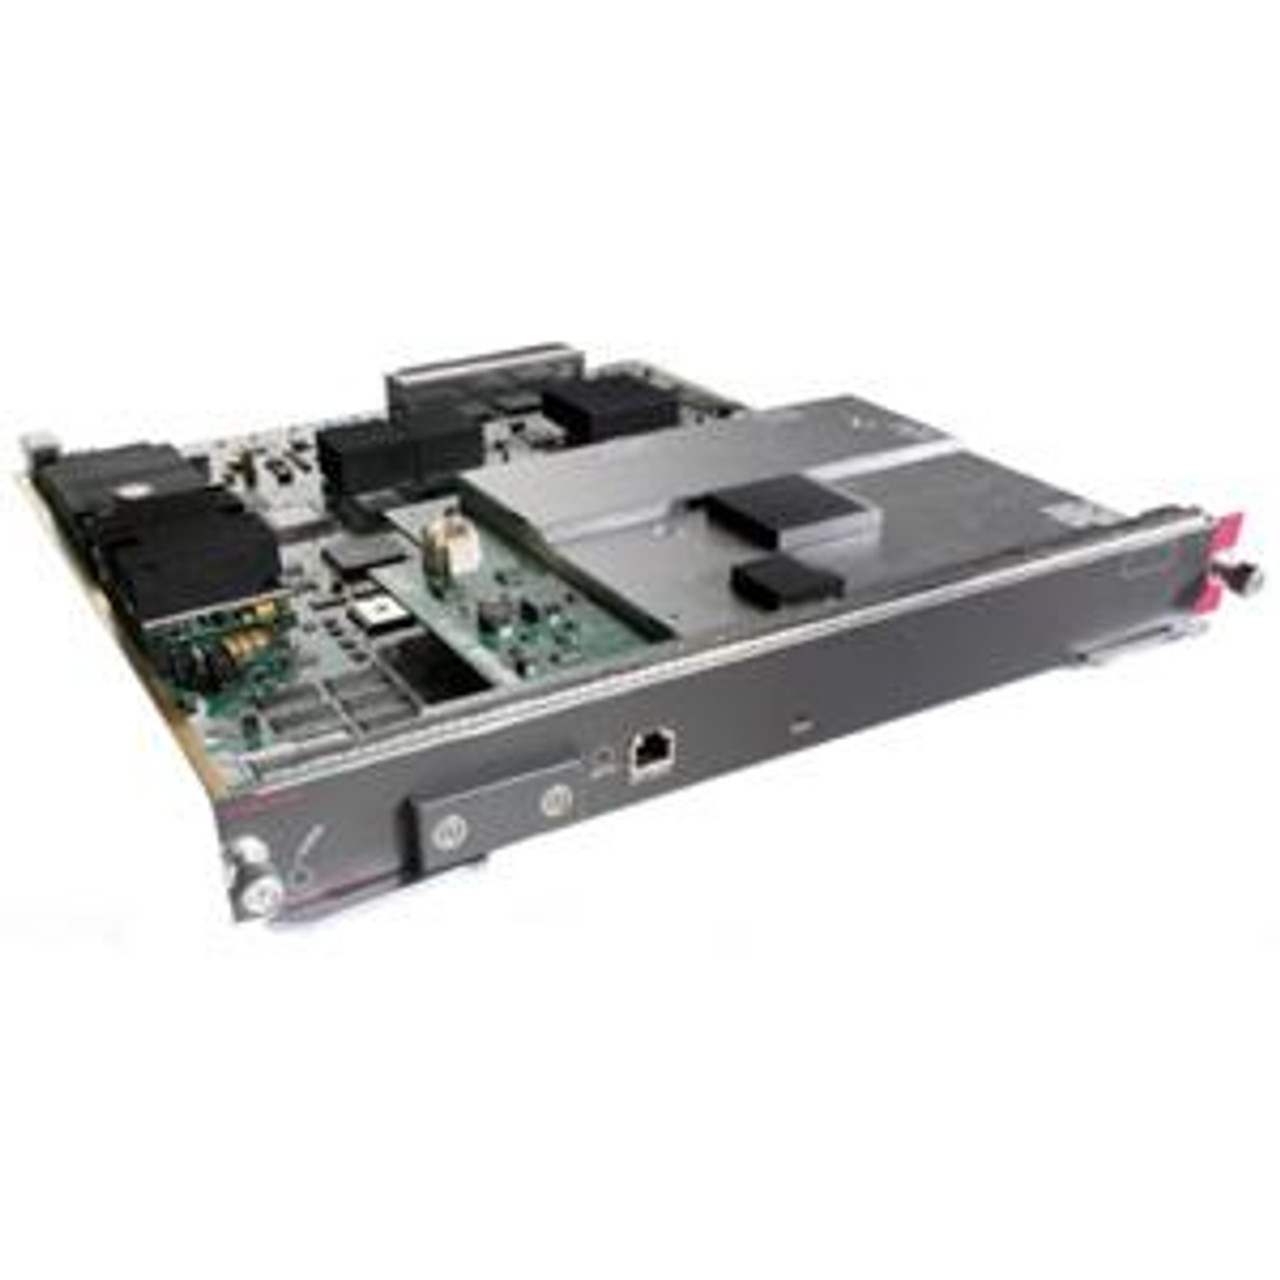 WS-X6066-SLB-S-K9 Cisco 7600 Content Switching Module with SSL is not fabric enabled (Refurbished)